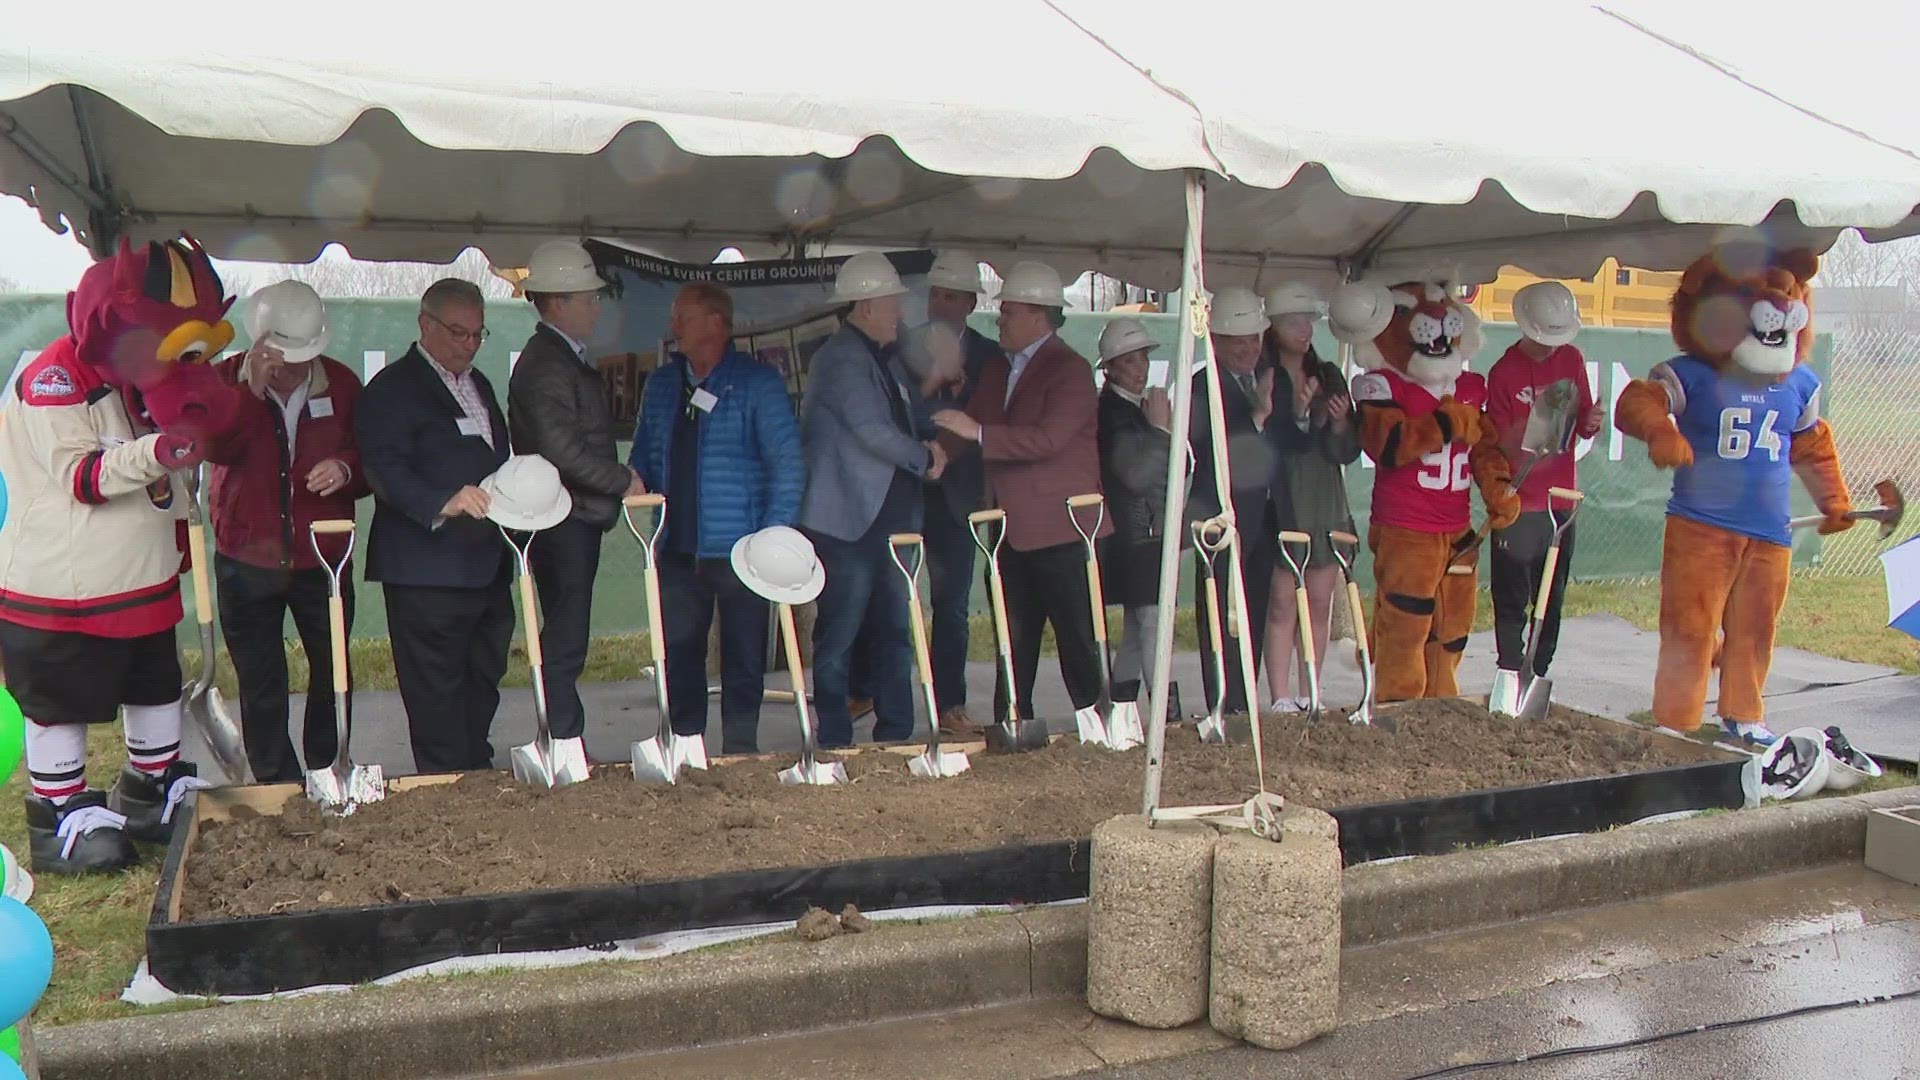 Fishers breaks ground on new events center